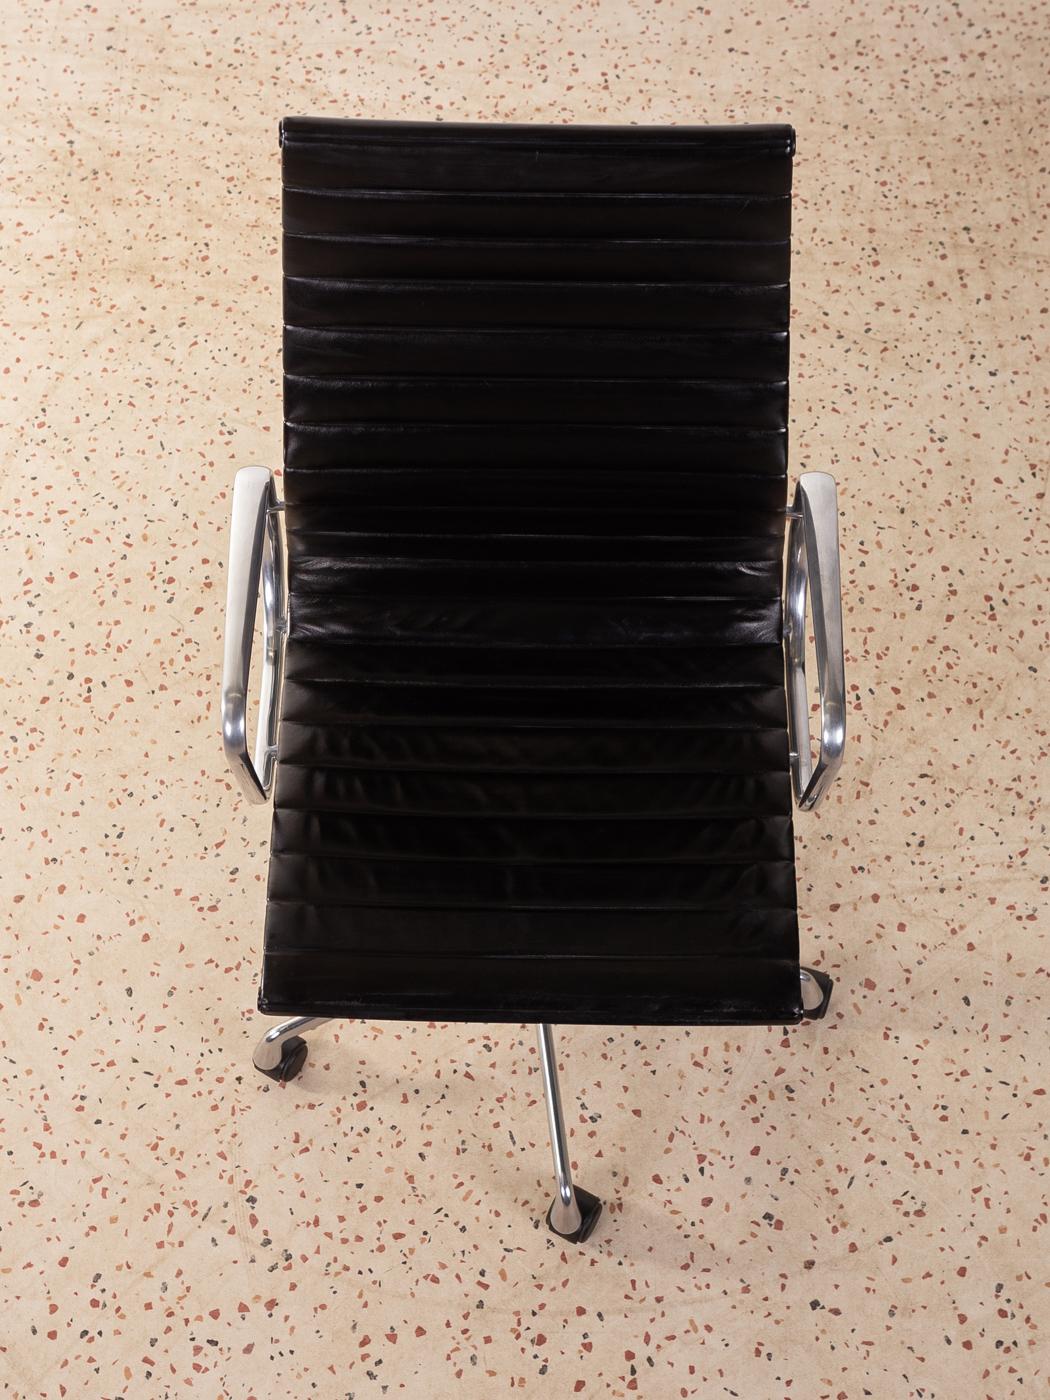  Aluminium Chair 119, Charles and Ray Eames, Vitra  For Sale 2